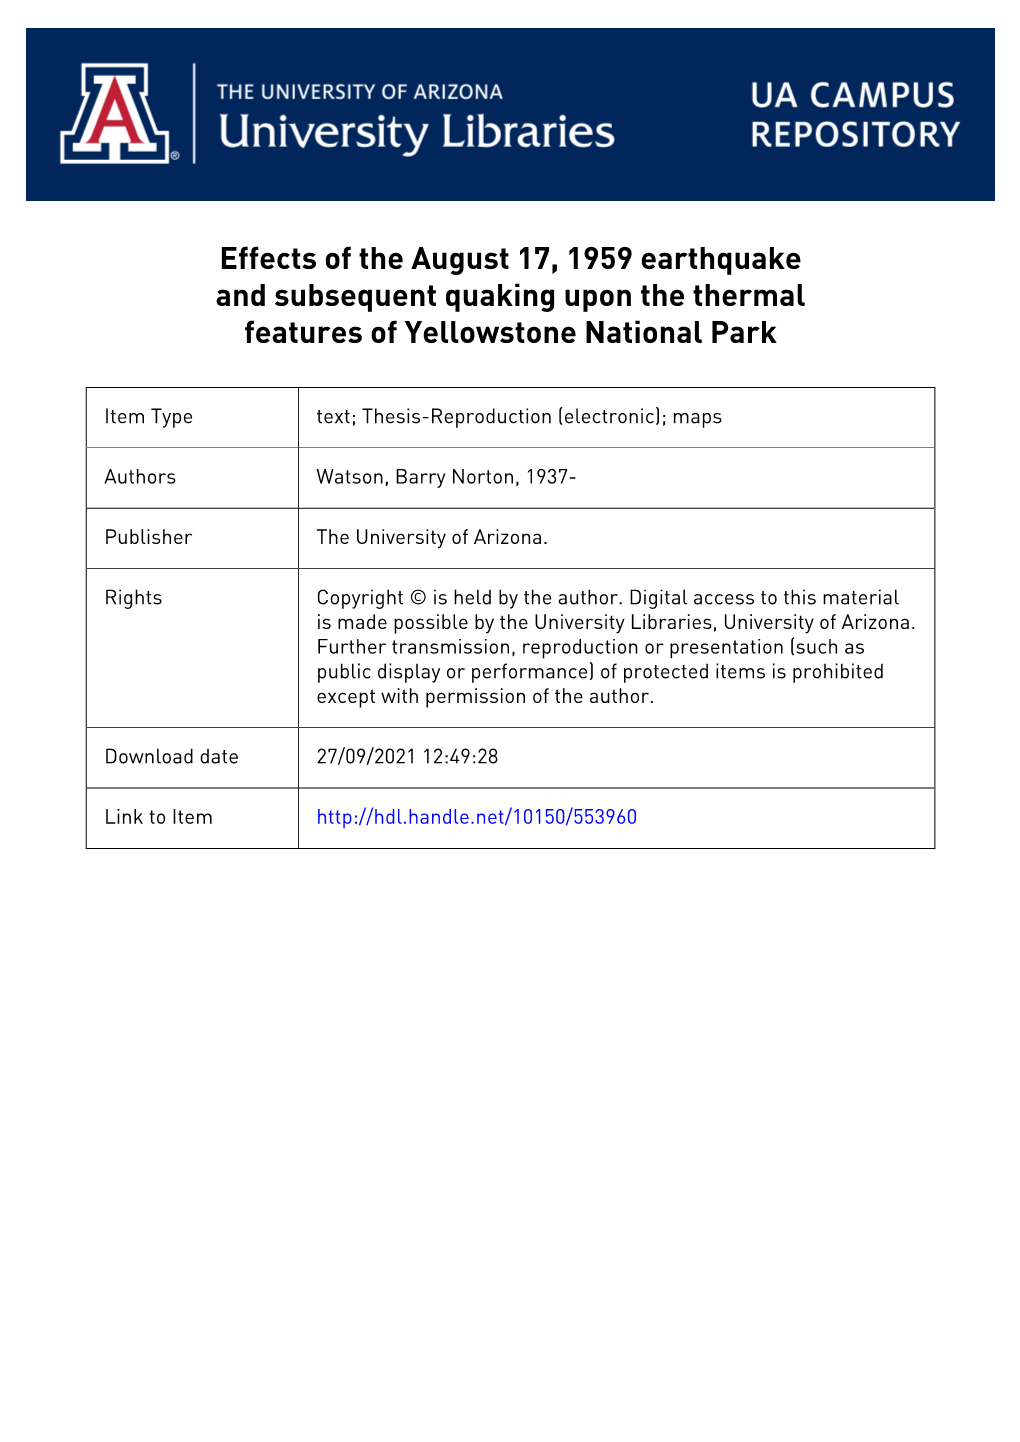 Effects of the August 17, 1959 Earthquake and Subsequent Quaking Upon the Thermal Features of Yellowstone National Park